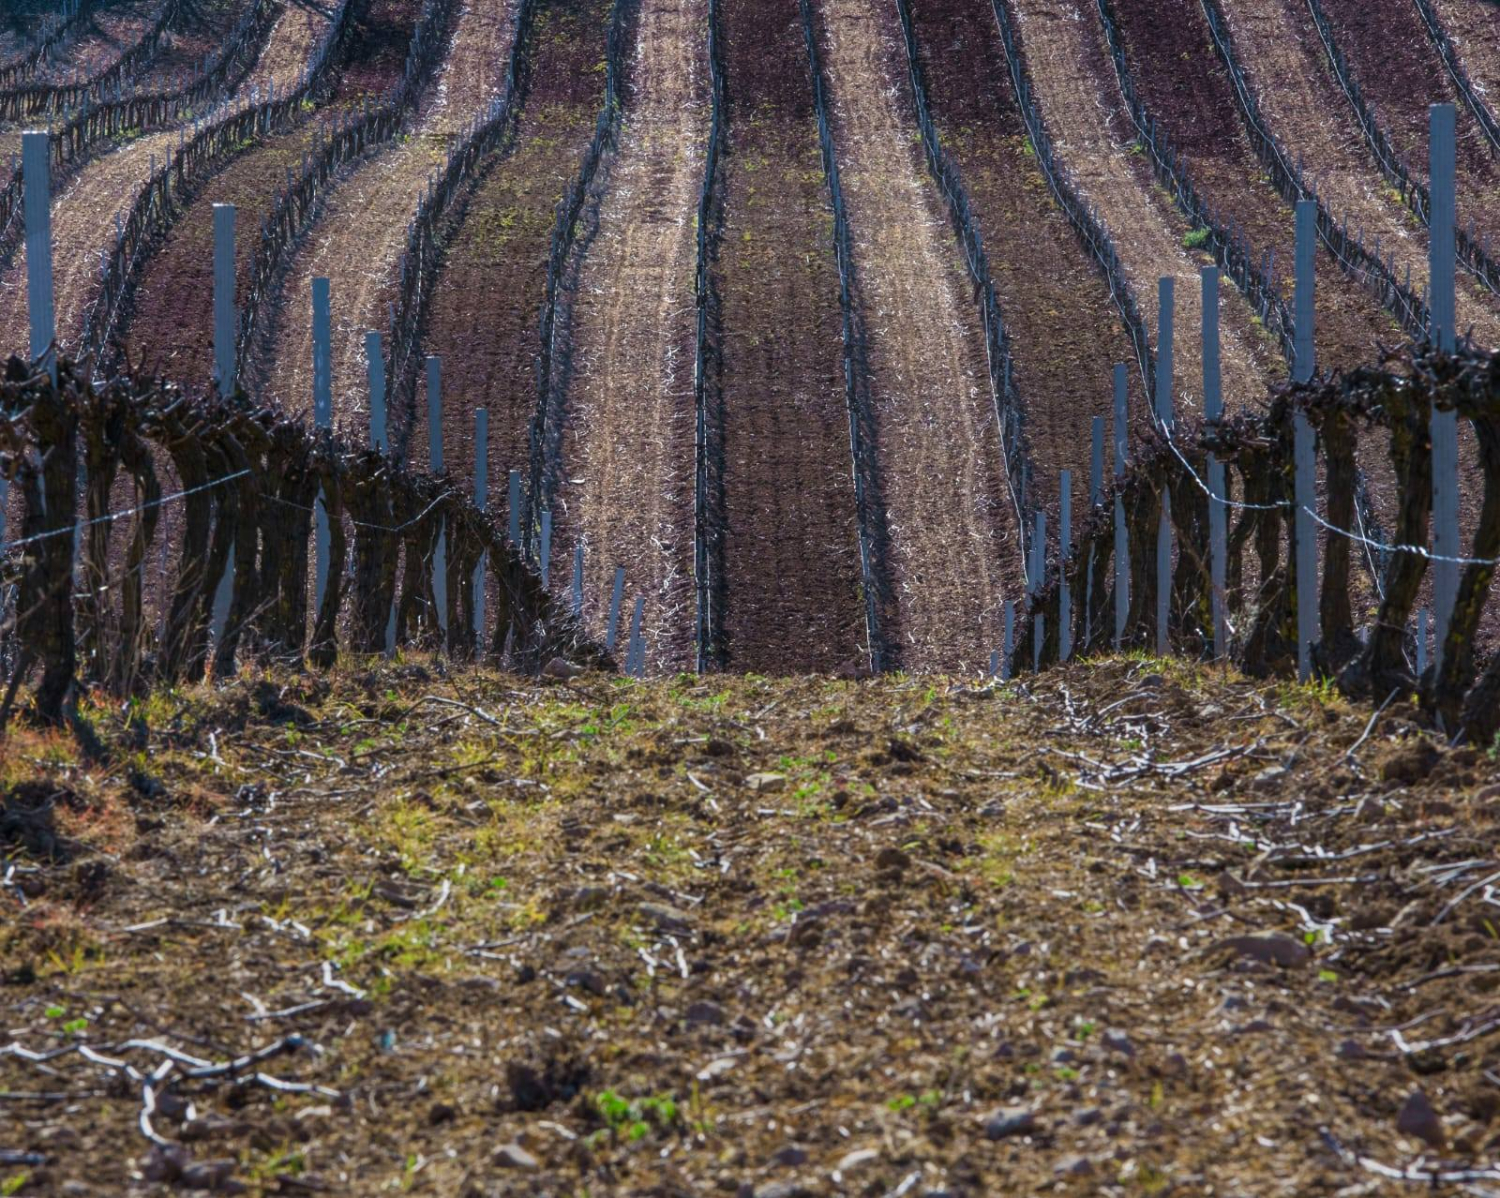 Winery rows in the open